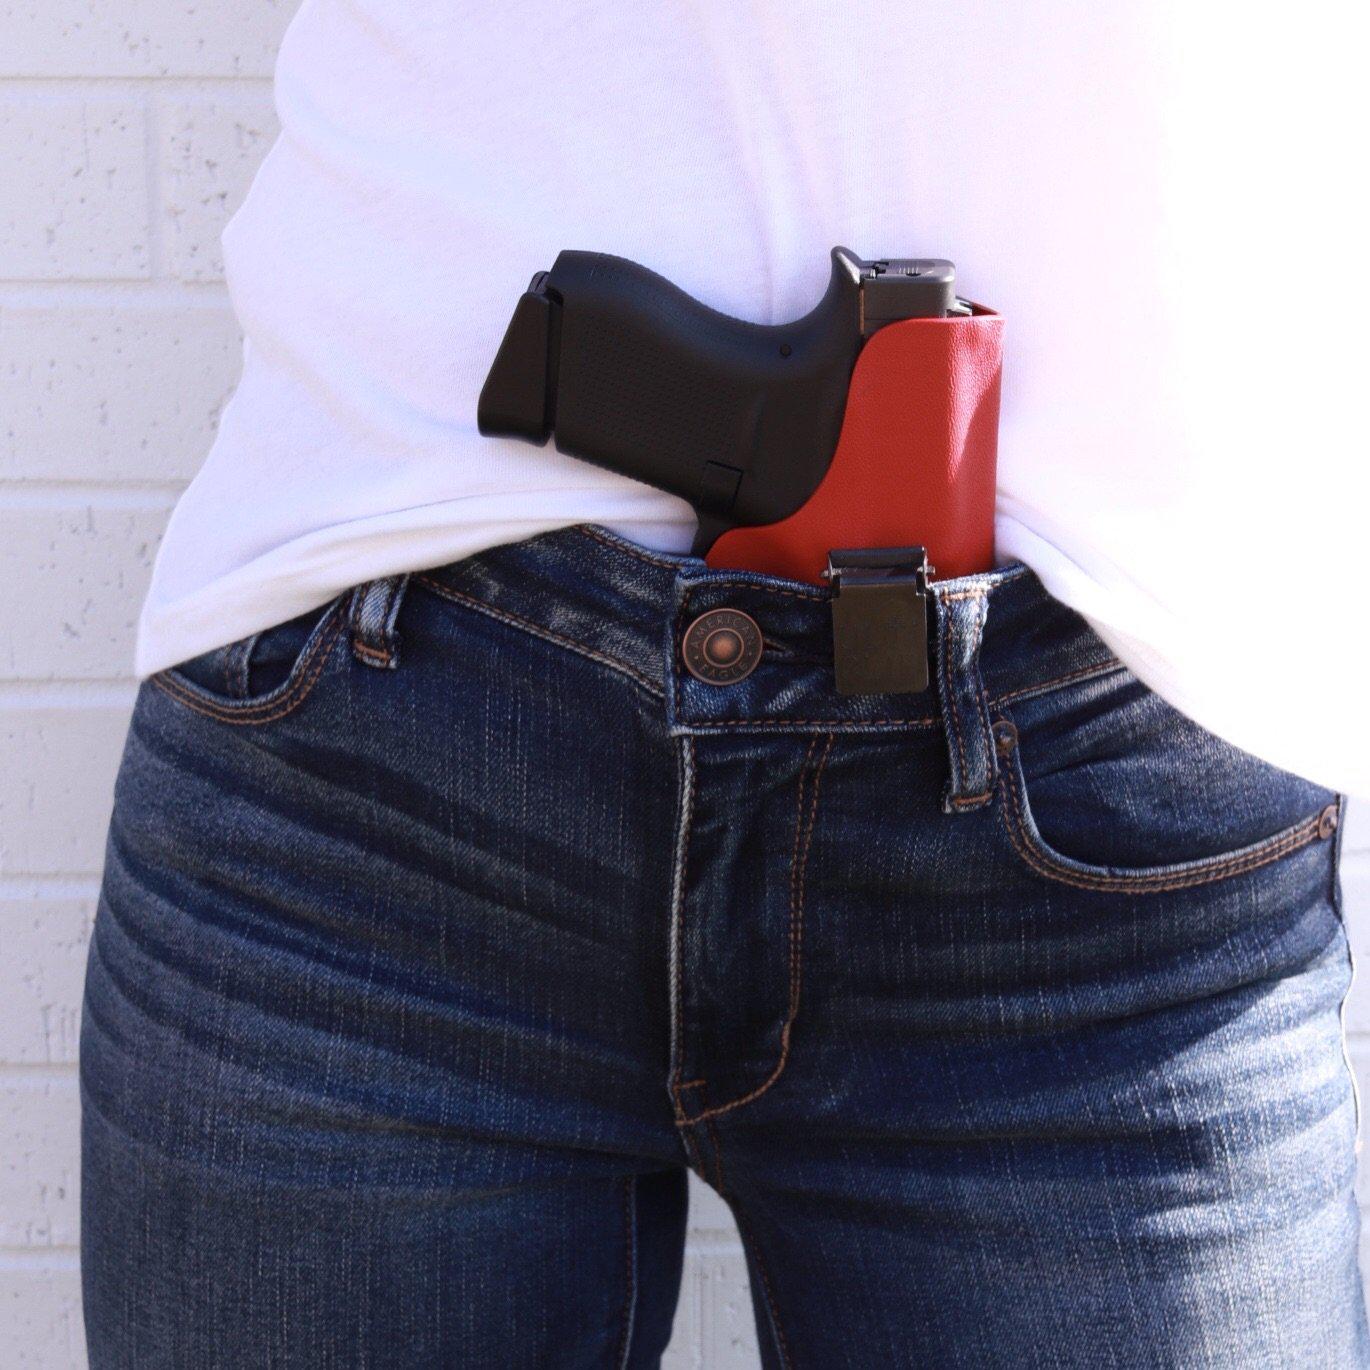 Betty 2.0 inside the waistband holsters for women - Flashbang Holsters